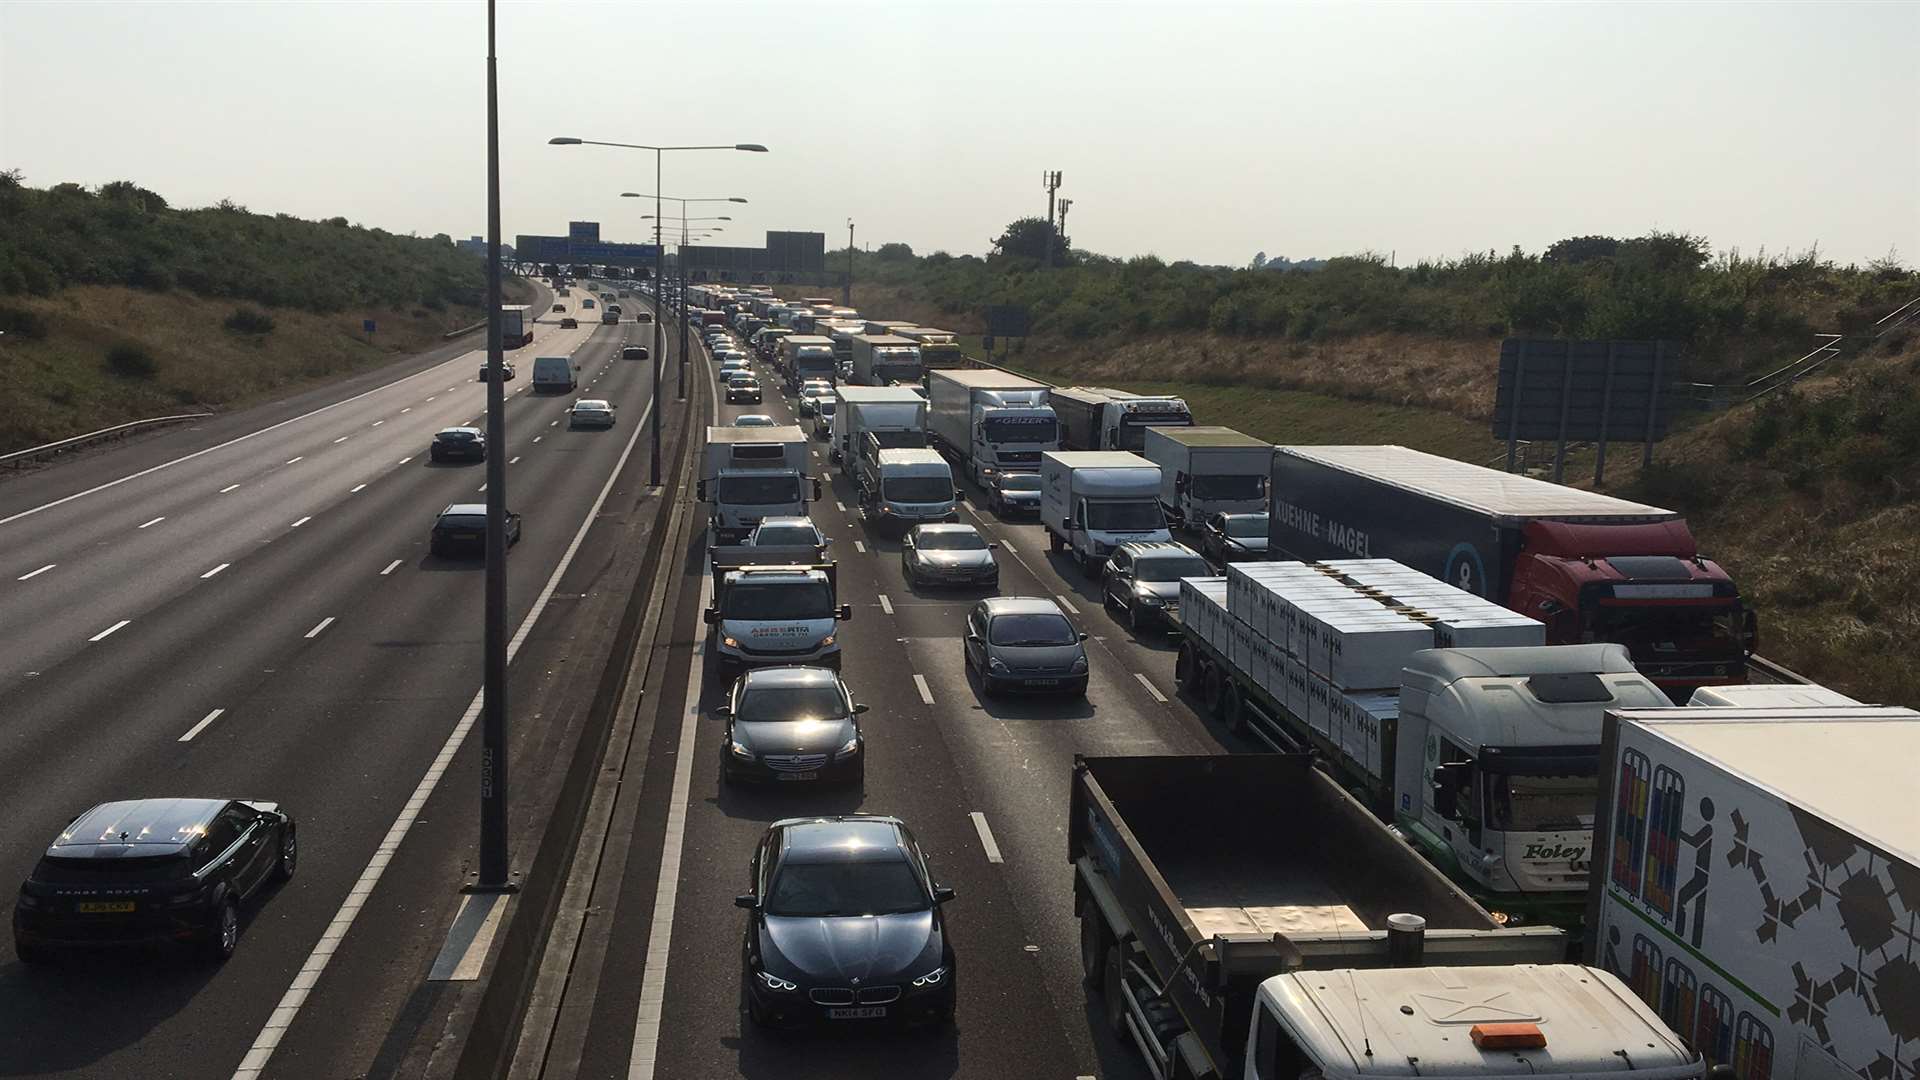 One of the M25 carriageways will be shut tonight for repairs. Picture: Justin Scrutton